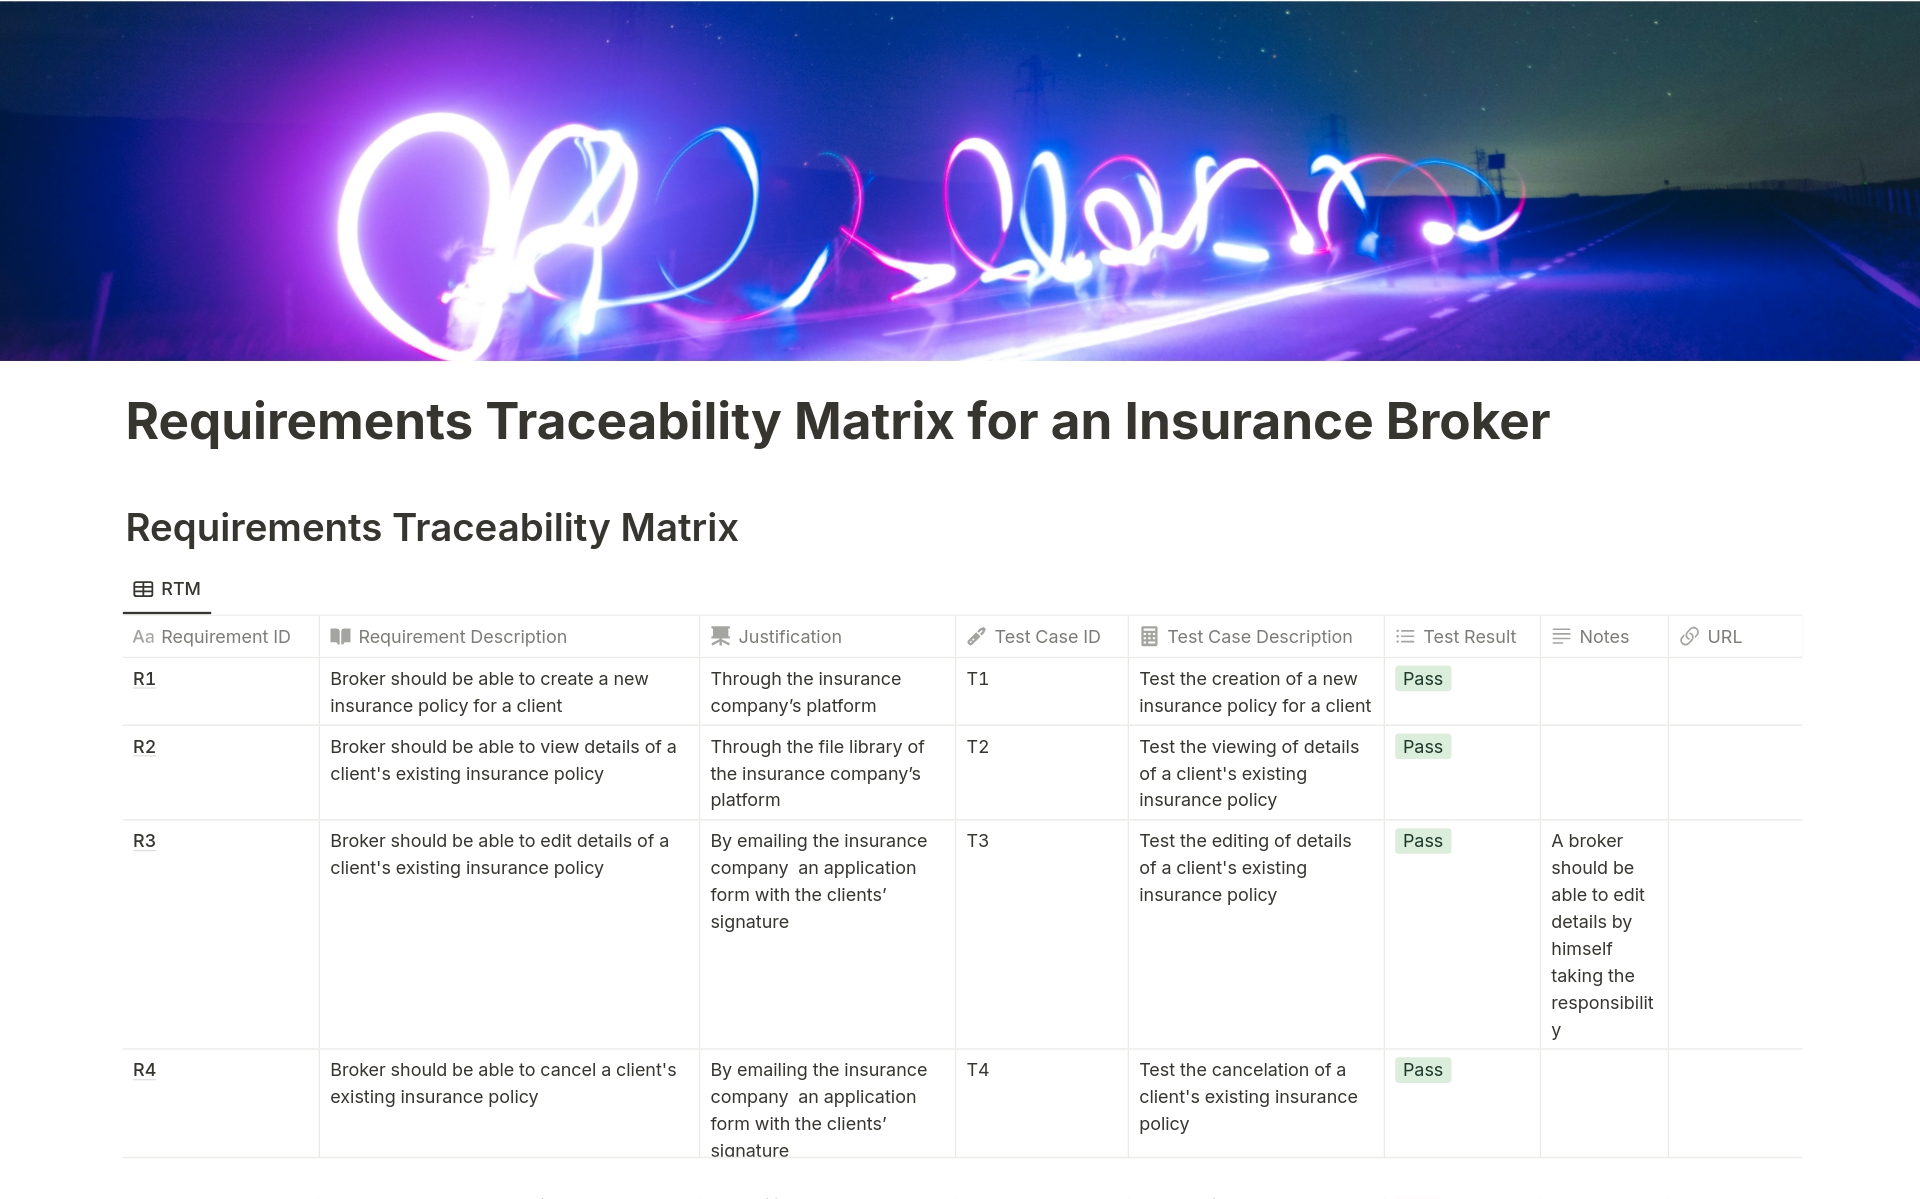 Requirements Traceability Matrix for an Insurance Broker
